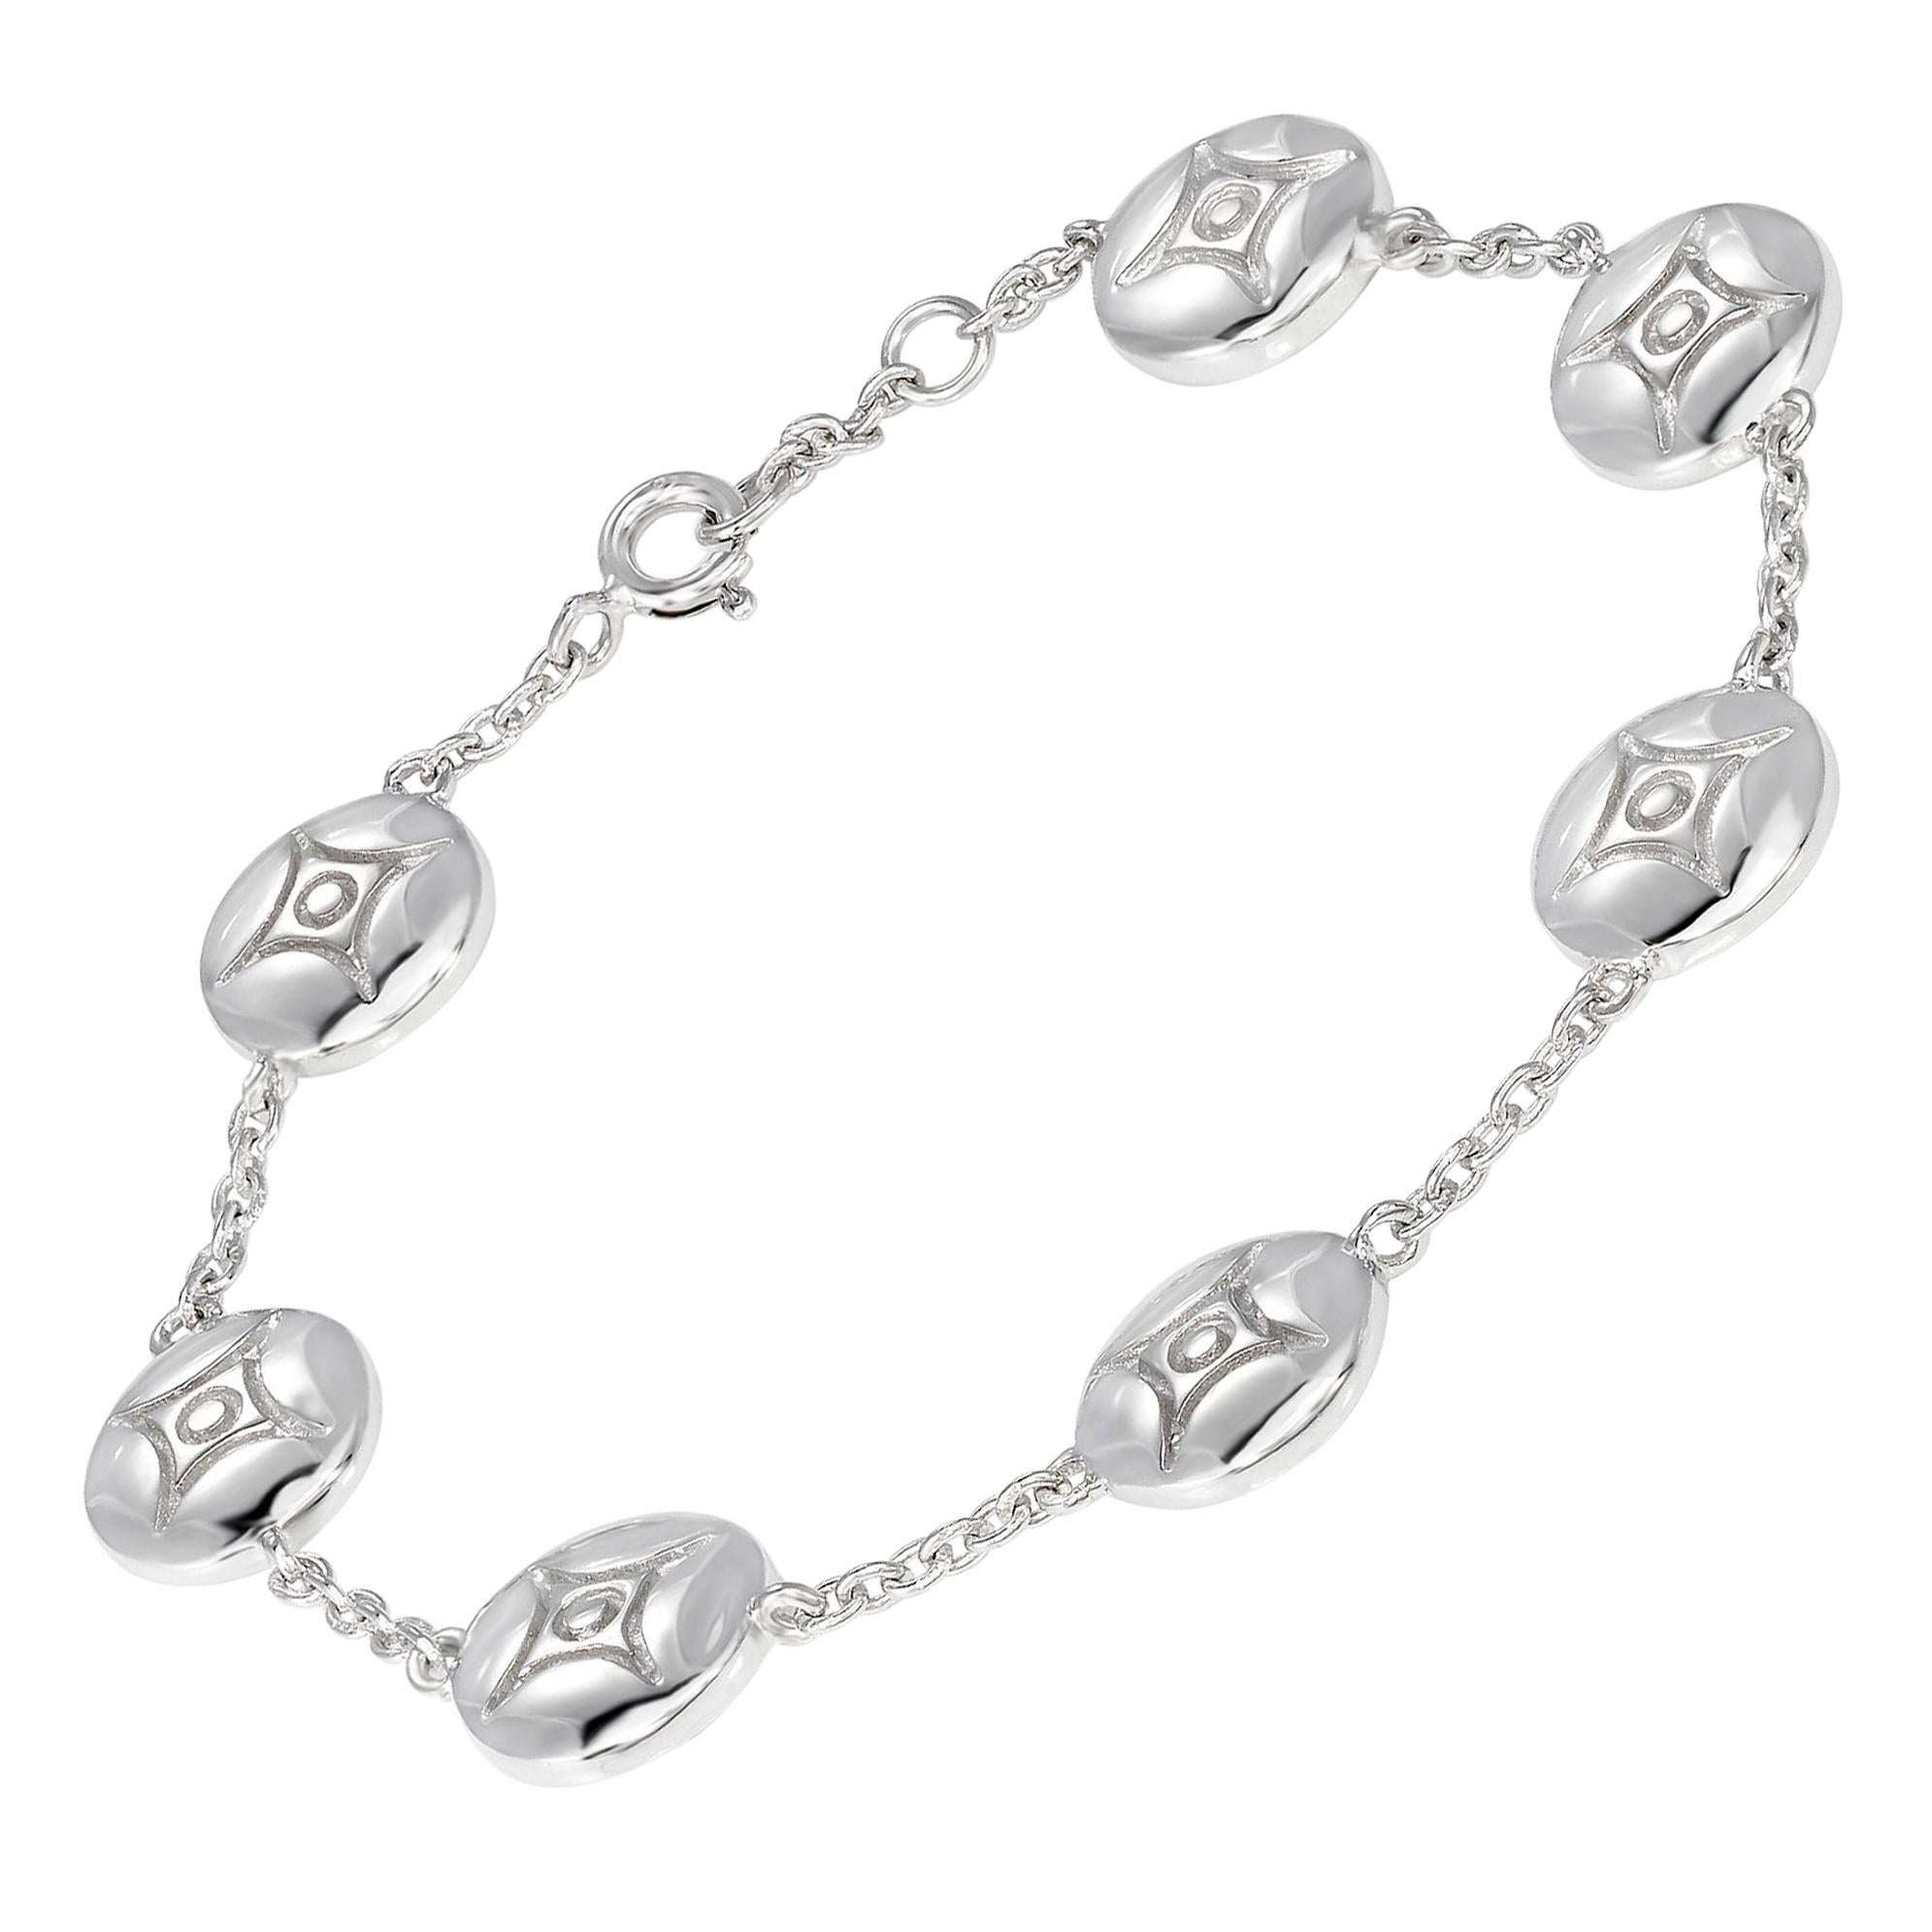 White Gold Plate Silver Link Charm Bracelet: 7 DIAMOND STARS in the SKY For Sale